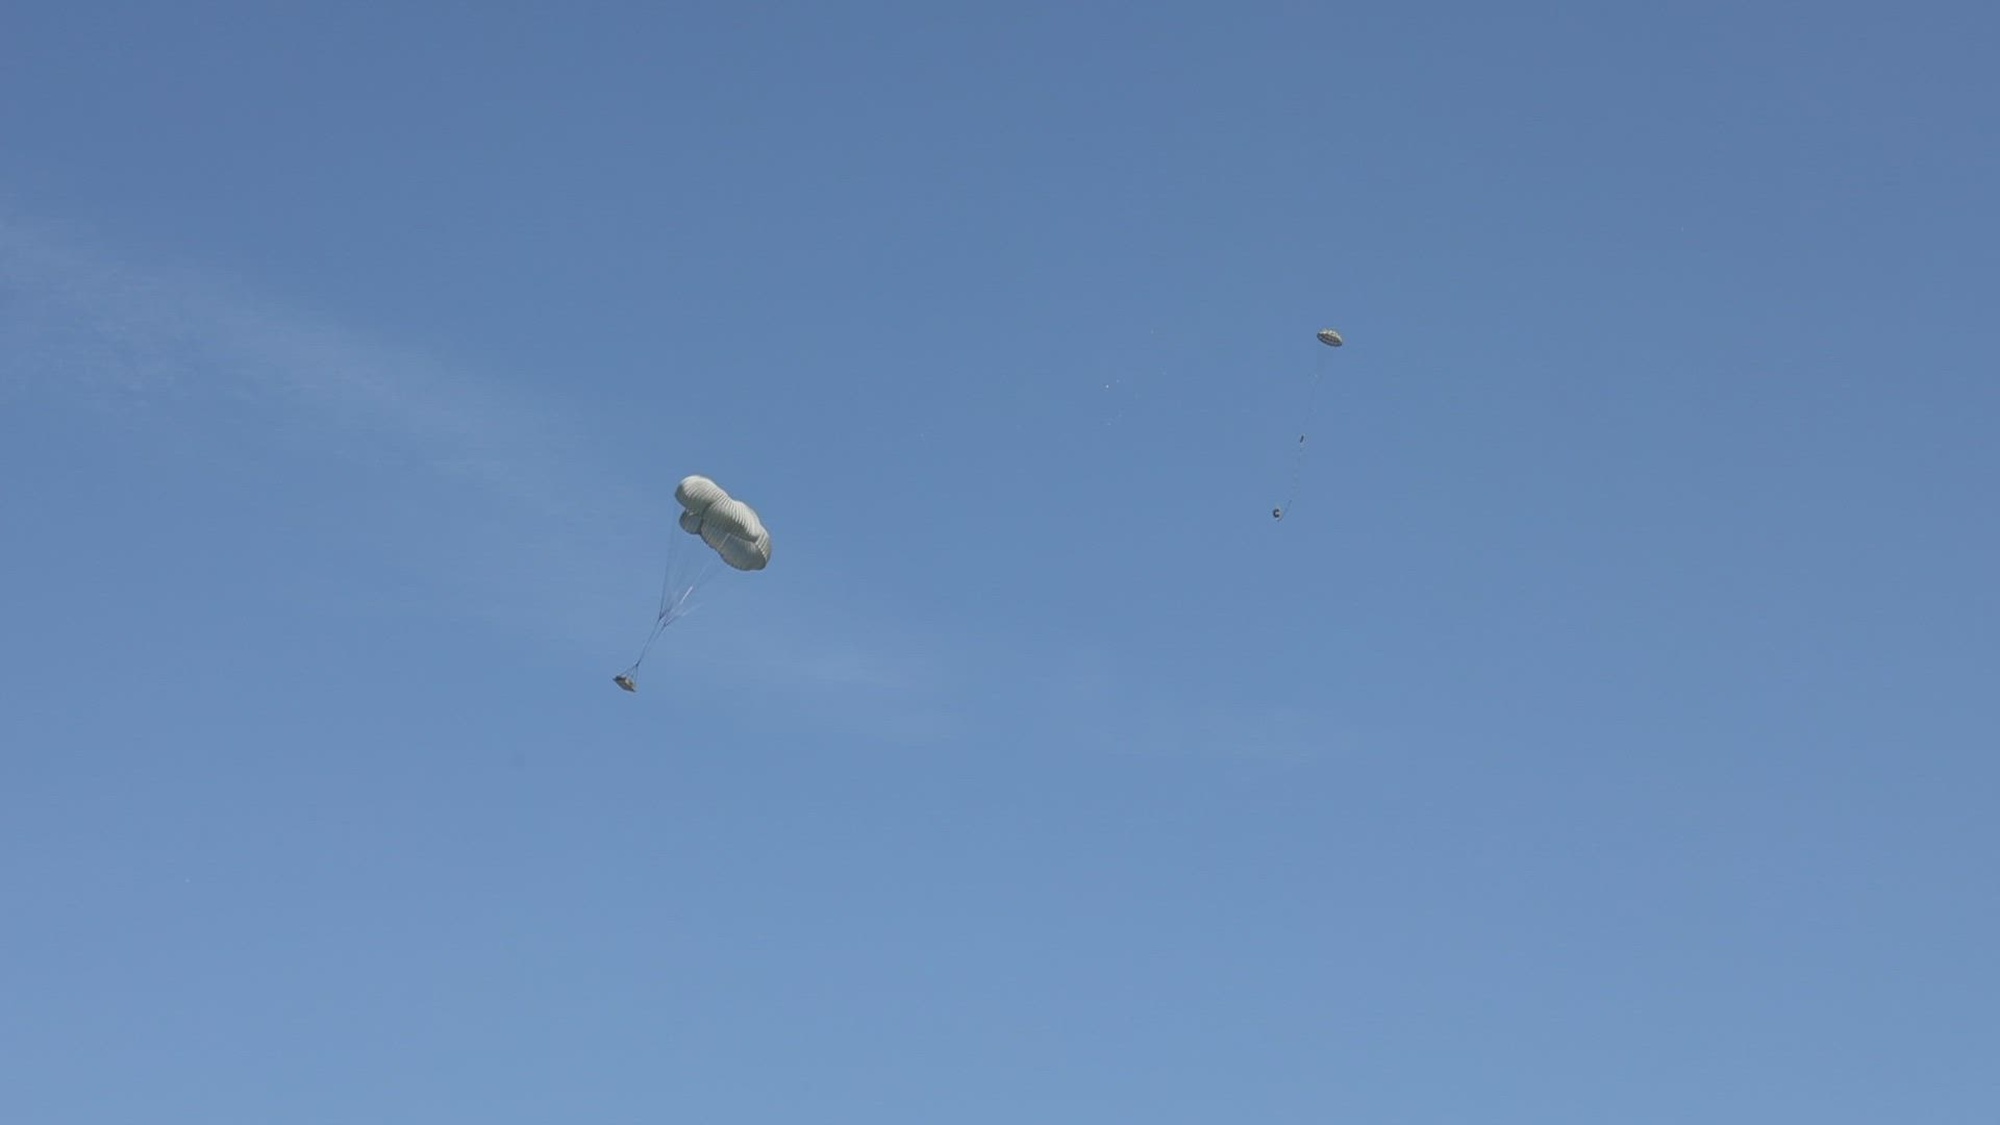 U.S. Army, Italian, German and Dutch Soldiers conduct tactical cargo drops as a part of the first phase of Falcon Leap 2023 across the Netherlands, September 4-7, 2023. Falcon Leap 23 (FALE 23) is a Royal Dutch Military led, multinational, joint technical airborne exercise designed to enhance interoperability of participating NATO airborne forces and aircrews in personnel and equipment parachuting operations in Arnhem, Netherlands from 02-17 September 2023. Falcon Leap is NATO’s largest technical airborne exercise which will also include ceremonies commemorating the 79th anniversary of Operation Market Garden. (U.S. Army video by Spc. Samuel Signor)